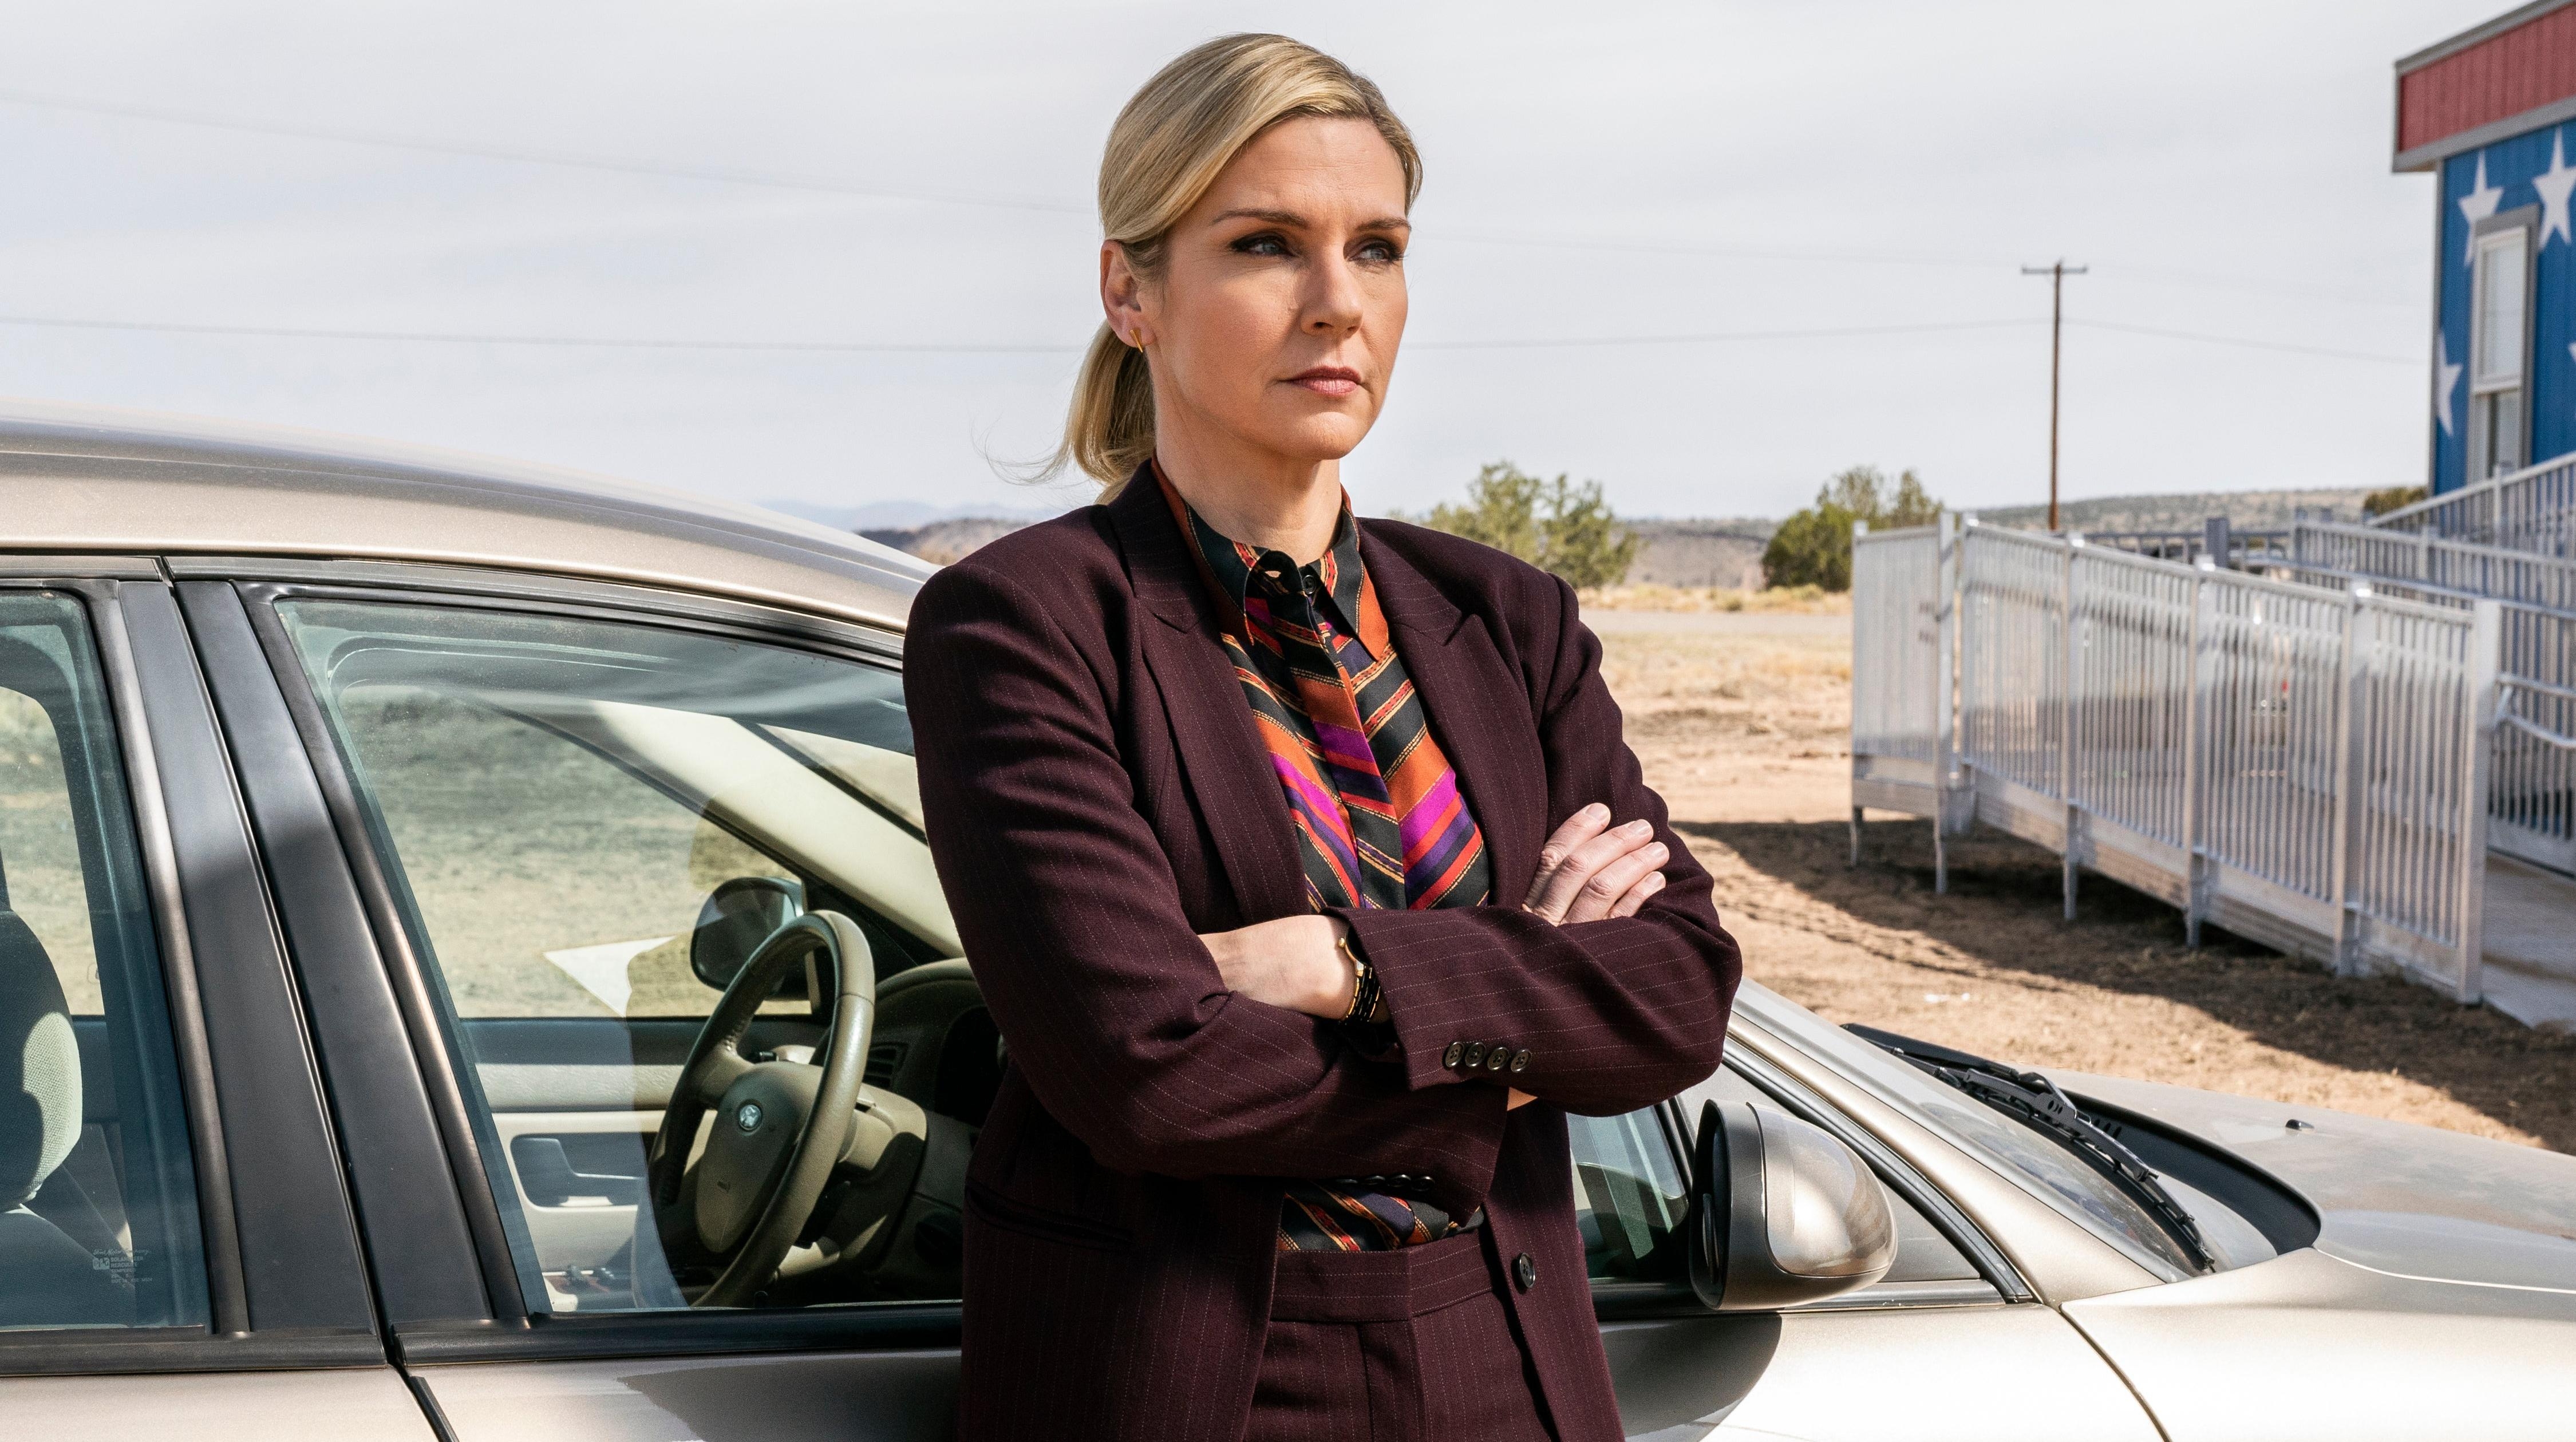 Better Calls Saul’s final season opens with a duo of tense, thrilling episodes